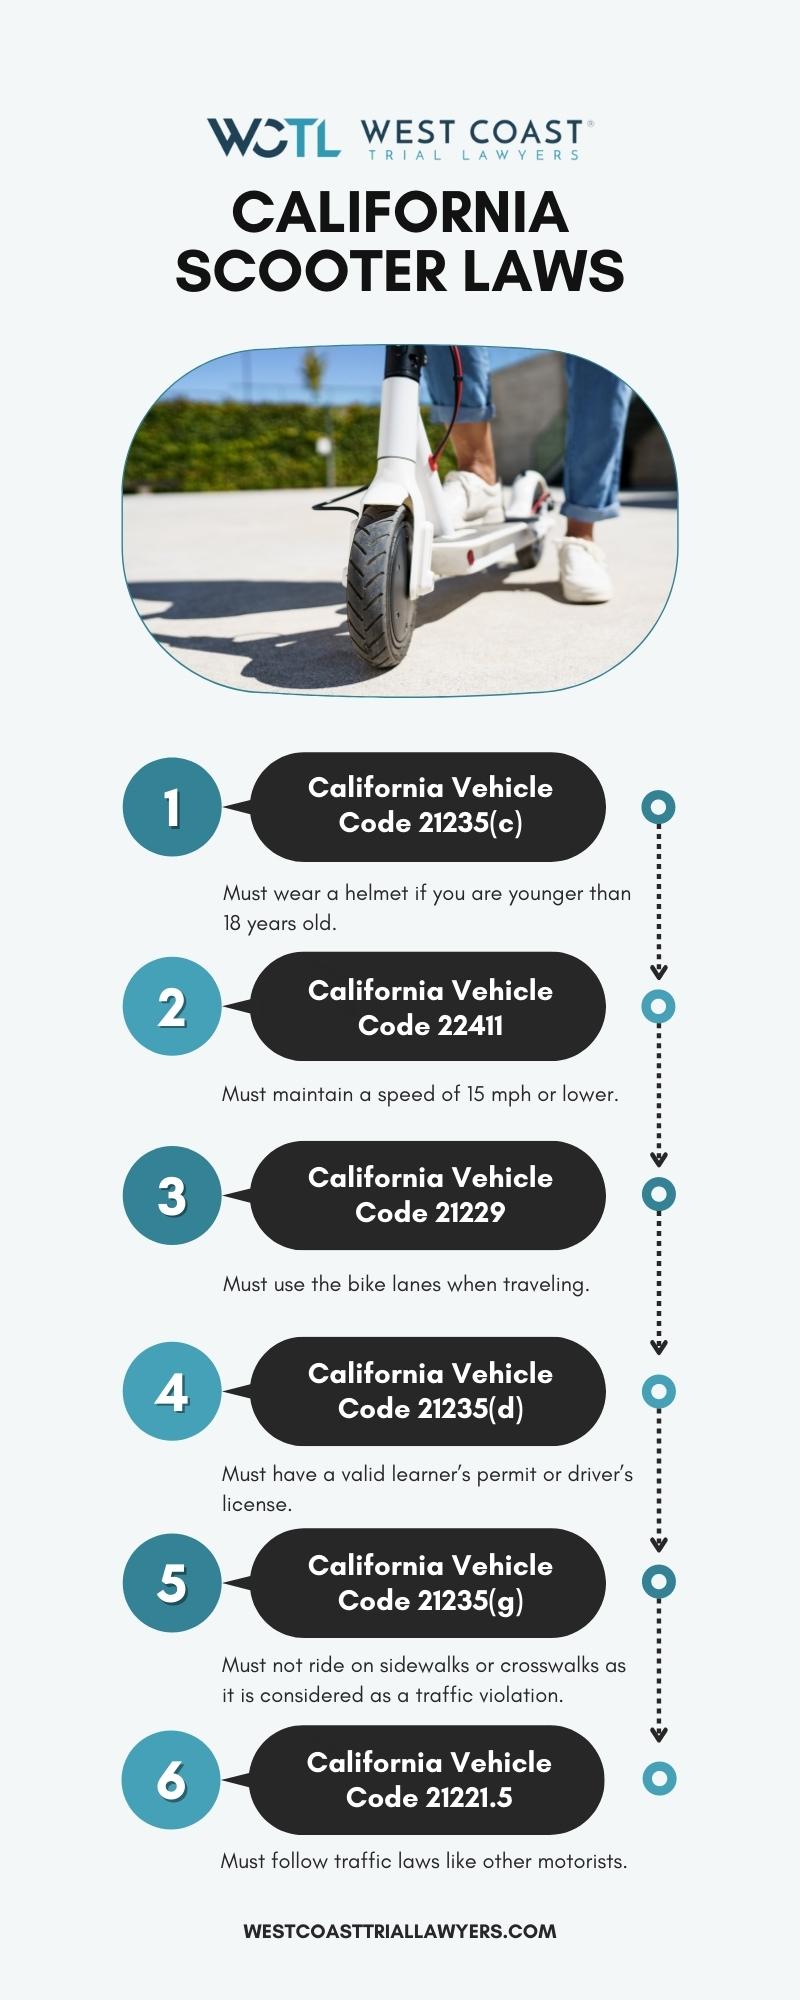 California scooter laws infographic with multiple penal code rules and laws.